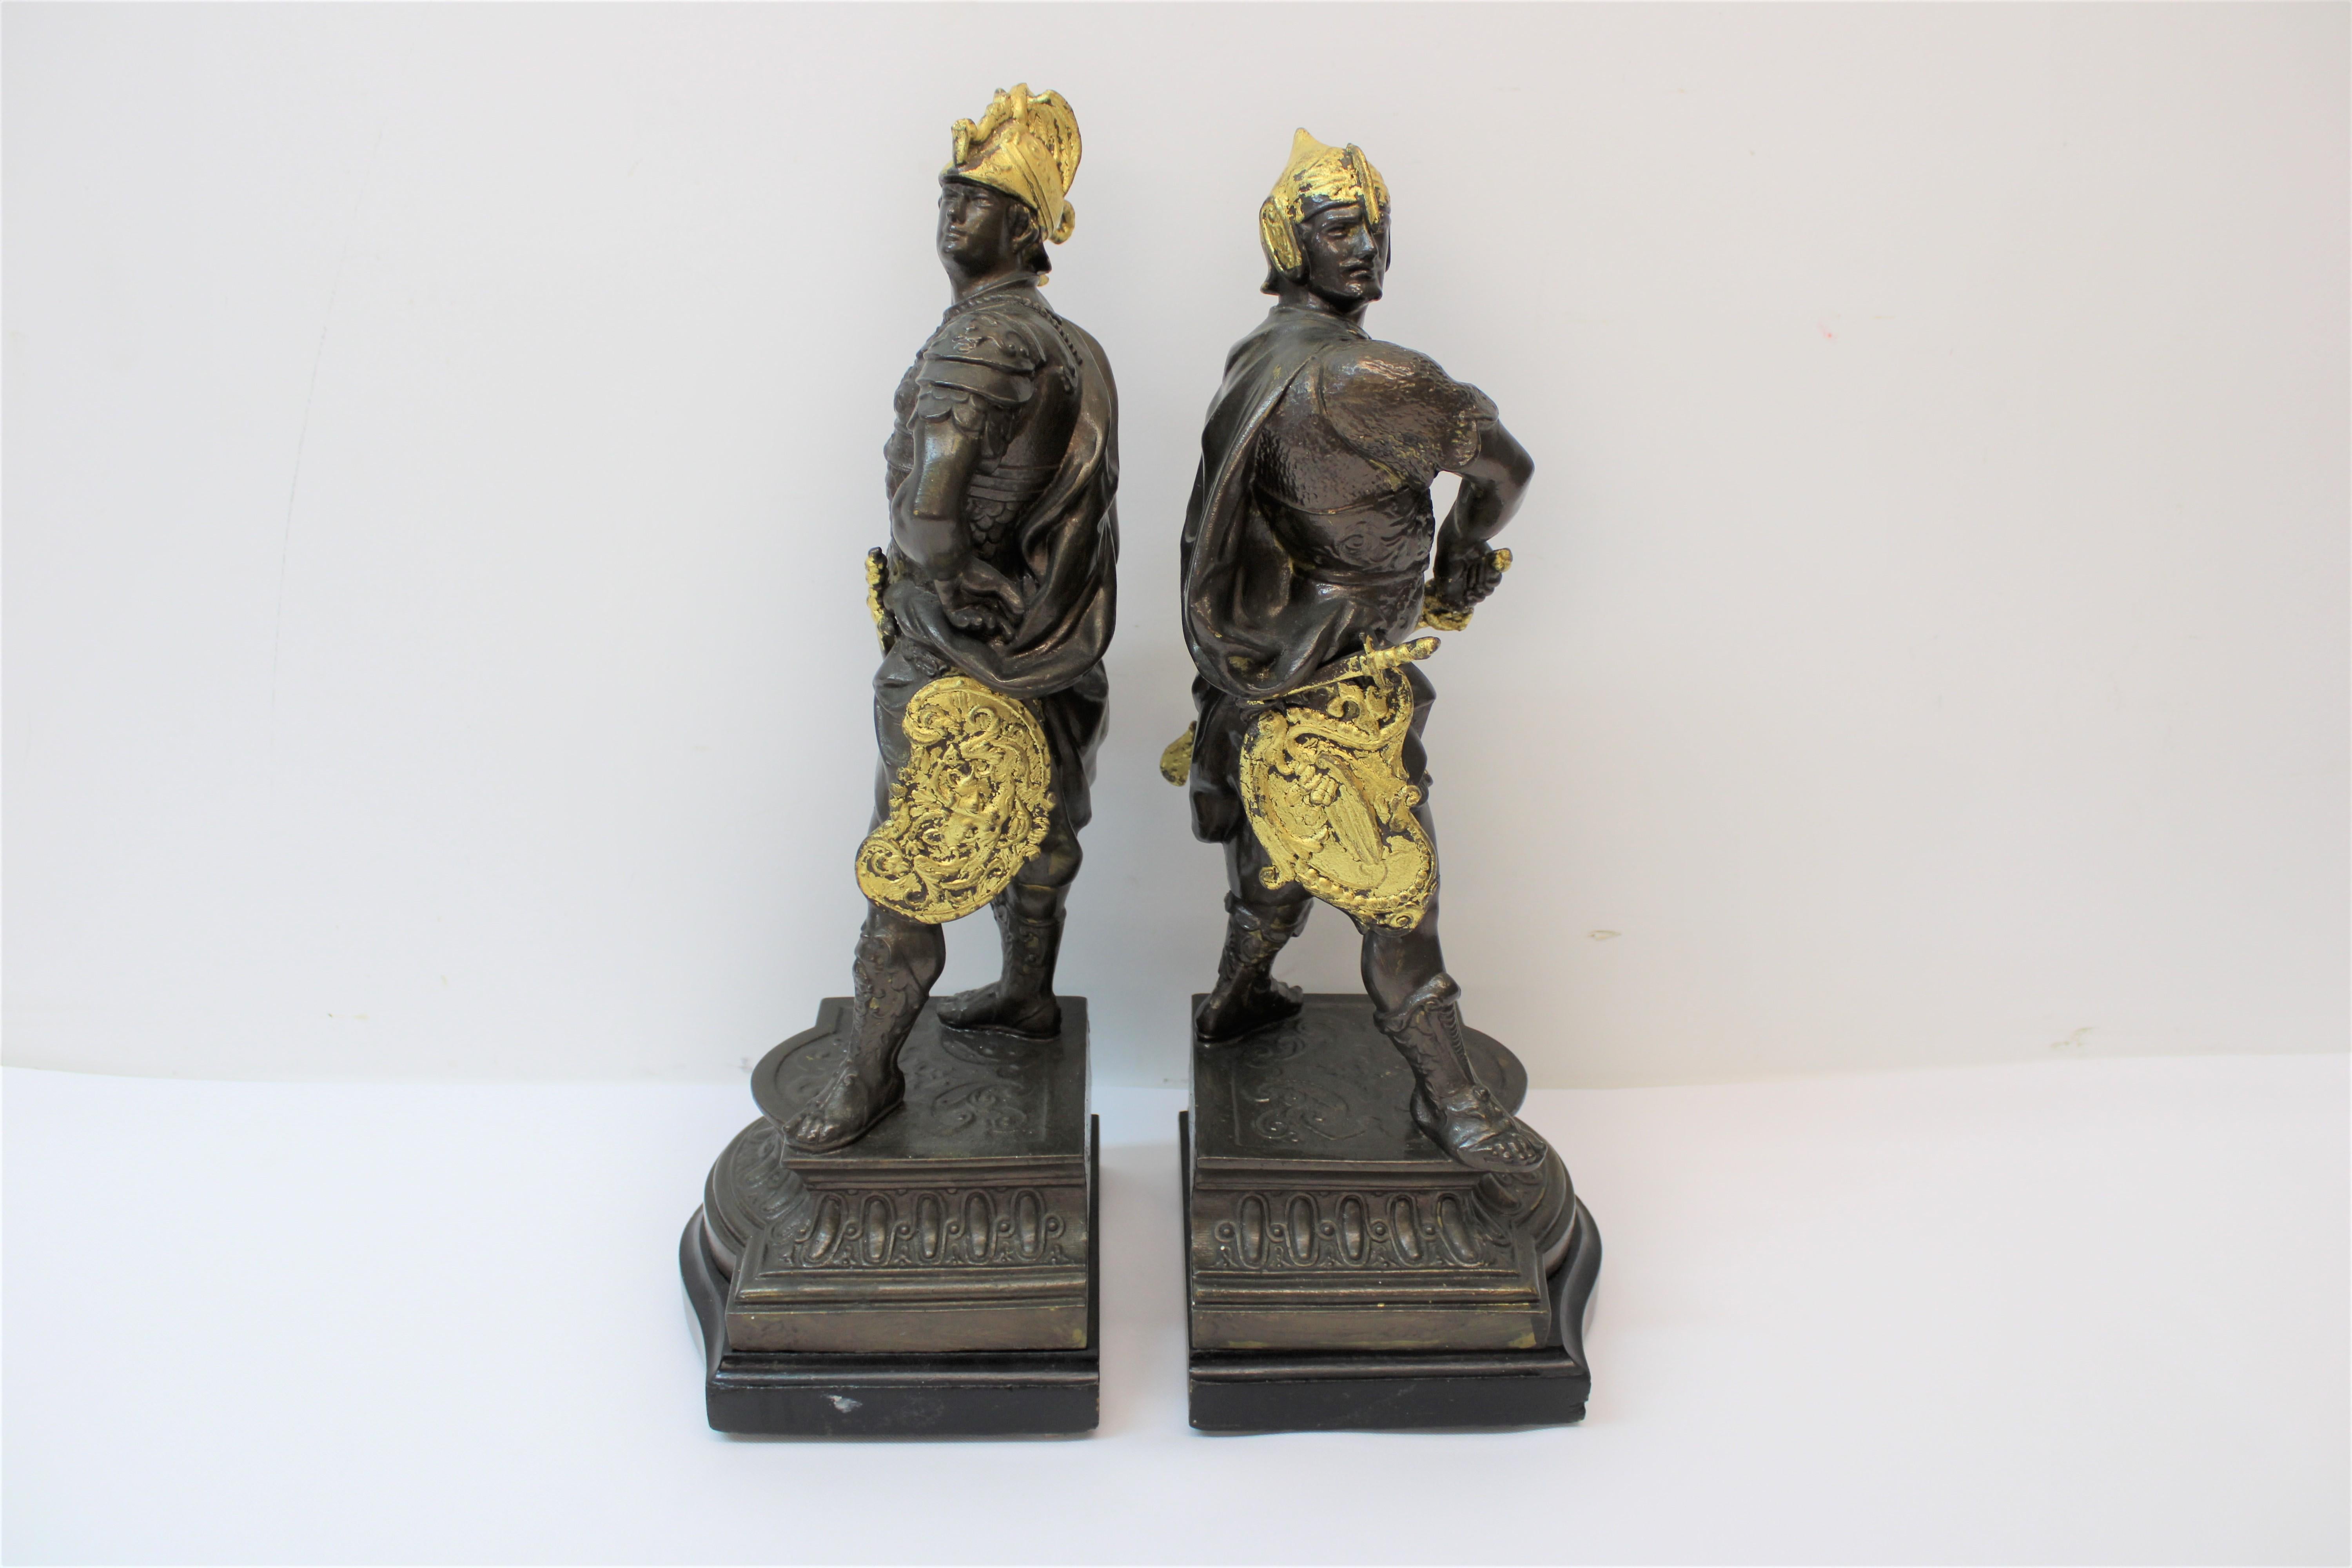 C. 19th century amazing French spelter warrior statue bookends w/ gilded helmets & shields.